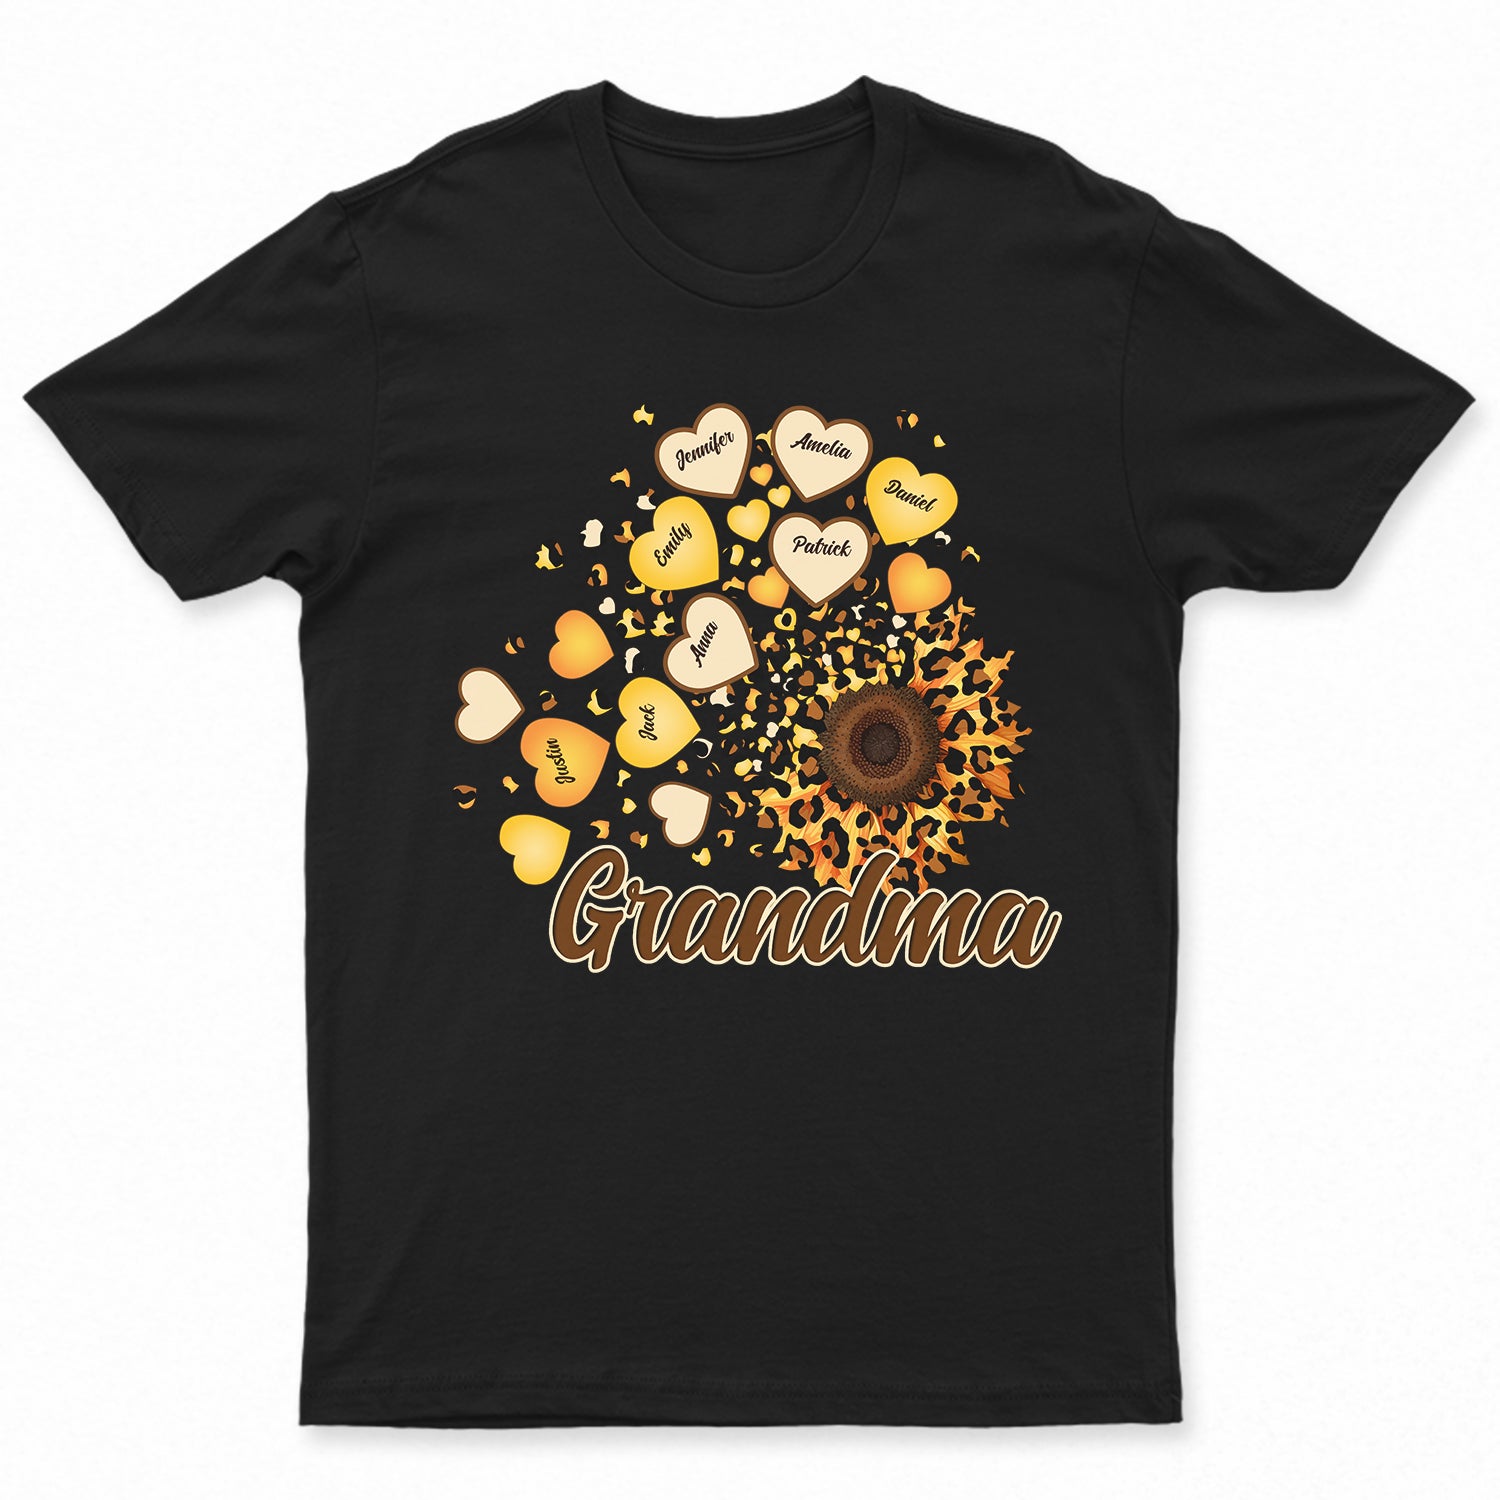 Grandma Mom Kids Sunflower - Gift For Mother, Grandmother - Personalized T Shirt